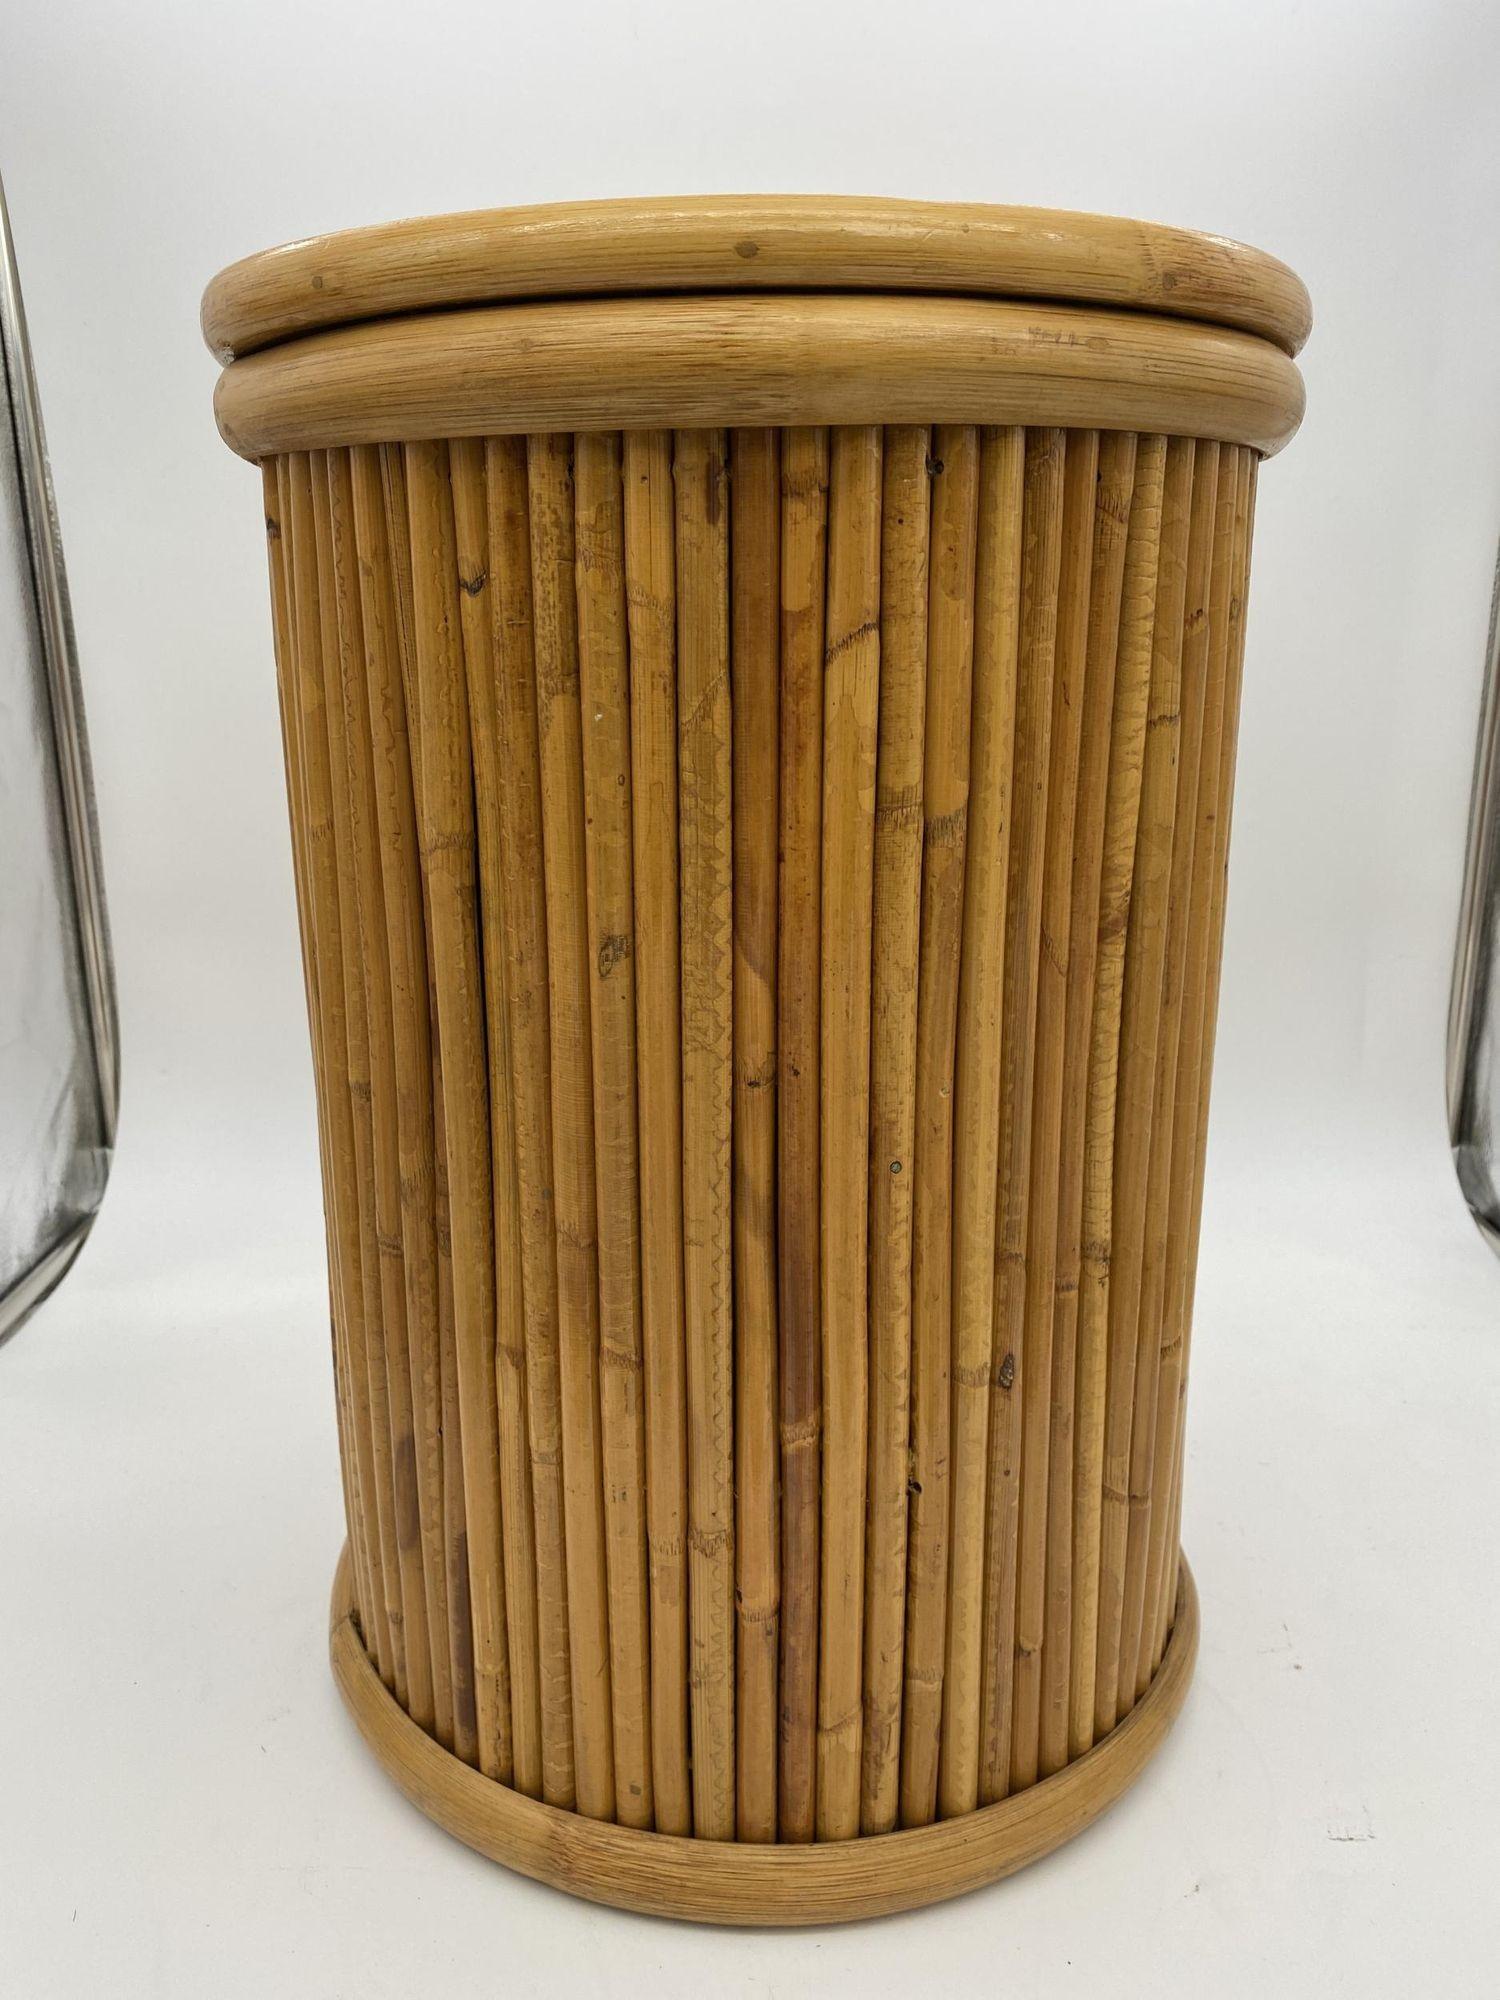 Mid-century era vertically stacked rattan pedestal side table with wood top and rattan border. Measure: 18